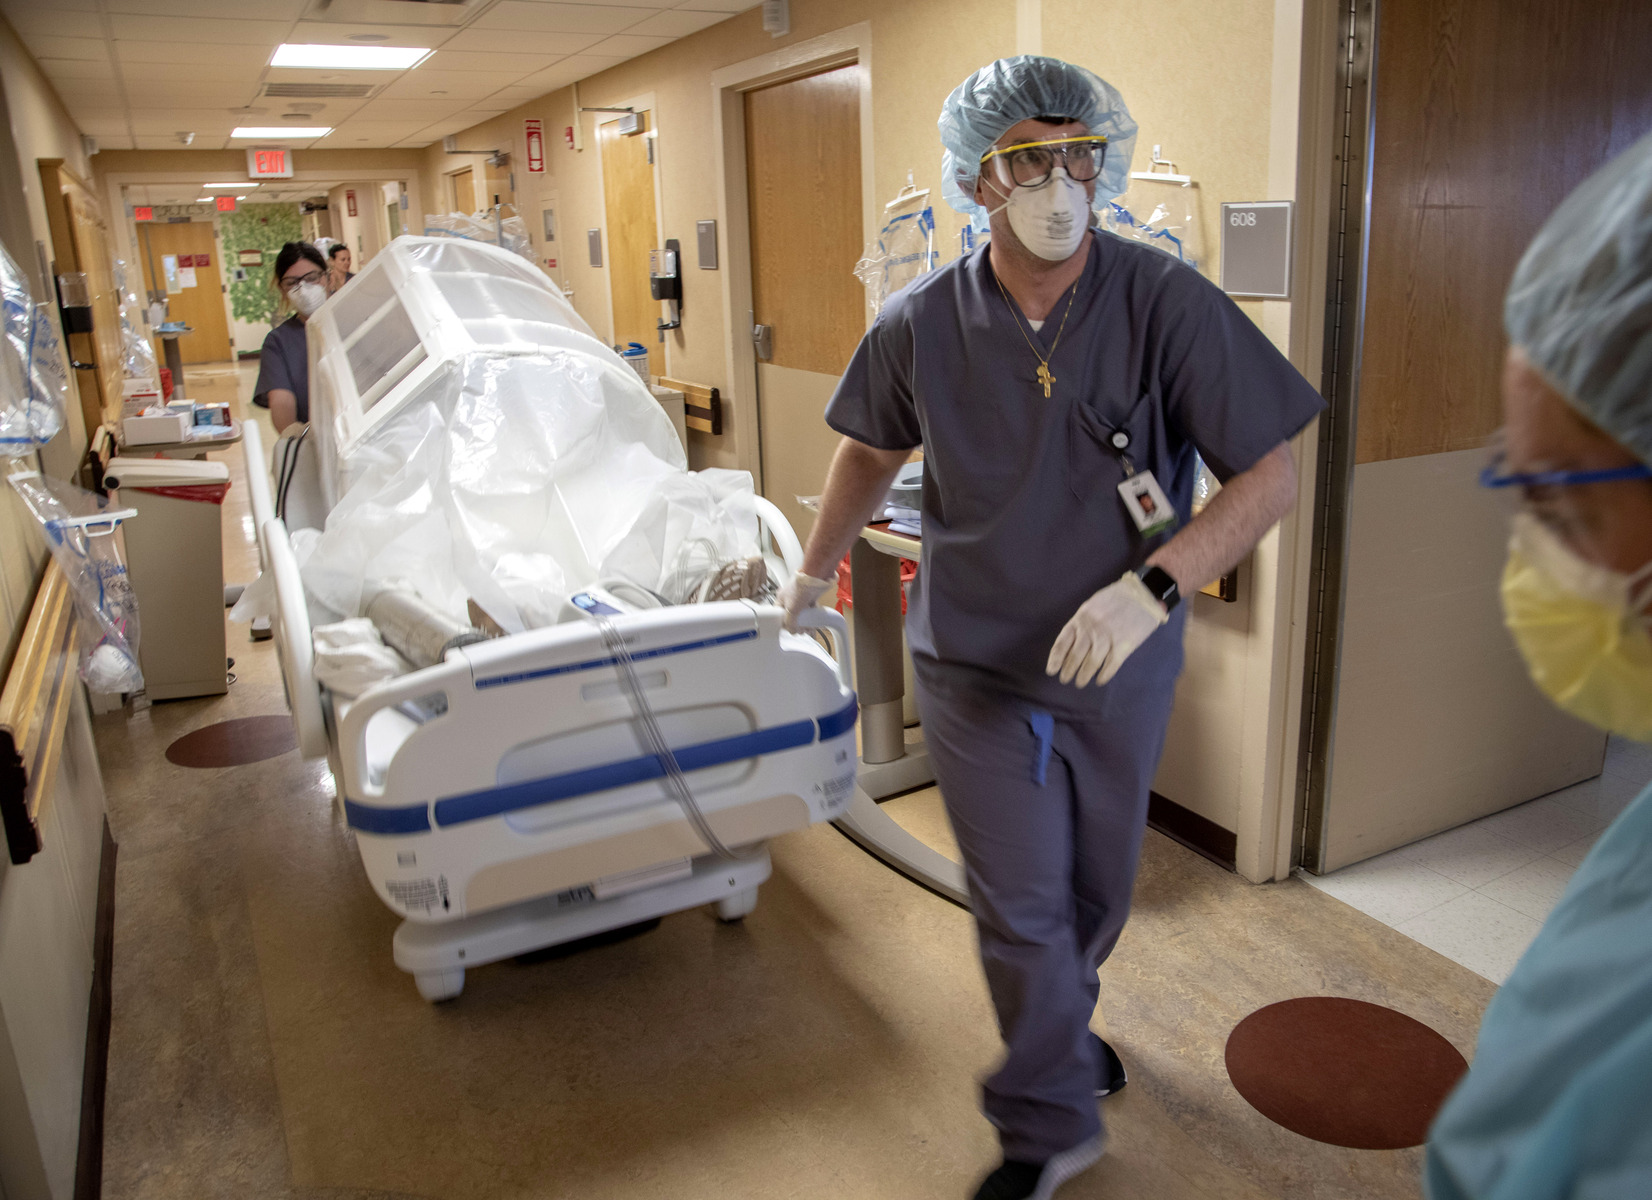 Stephen Cannon, RN, Transports a patient in Holy Name Medical Center in Teaneck, New Jersey, during the first few days of the COVID-19 Pandemic. 03/19/2020.  Photos by Jeff Rhode/Holy Name Medical Center